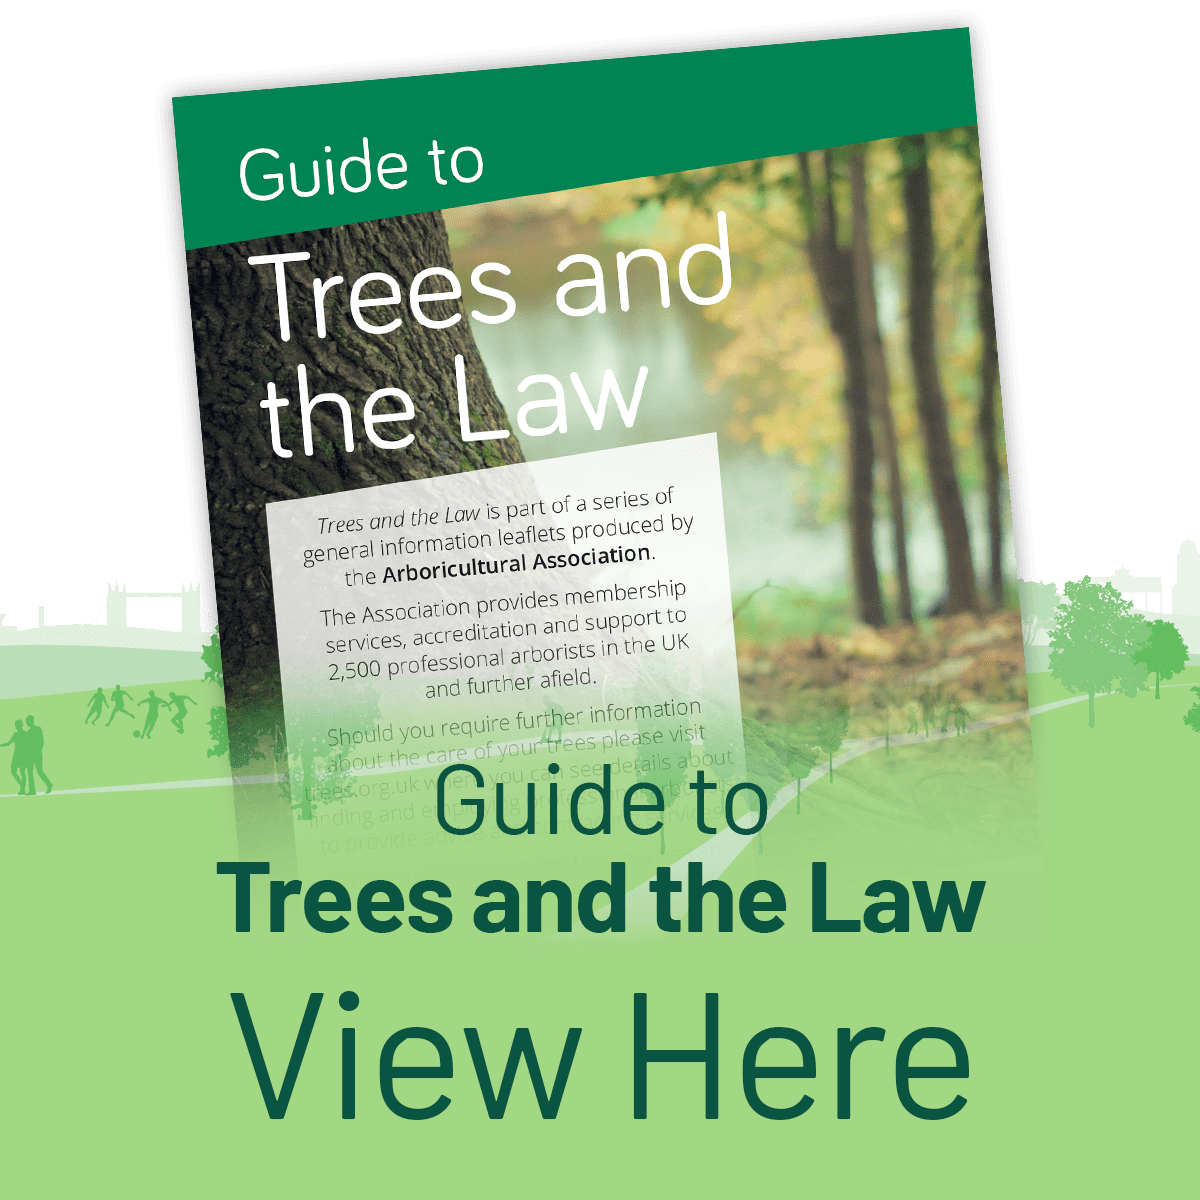 View the Guide to Trees and the Law Leaflet